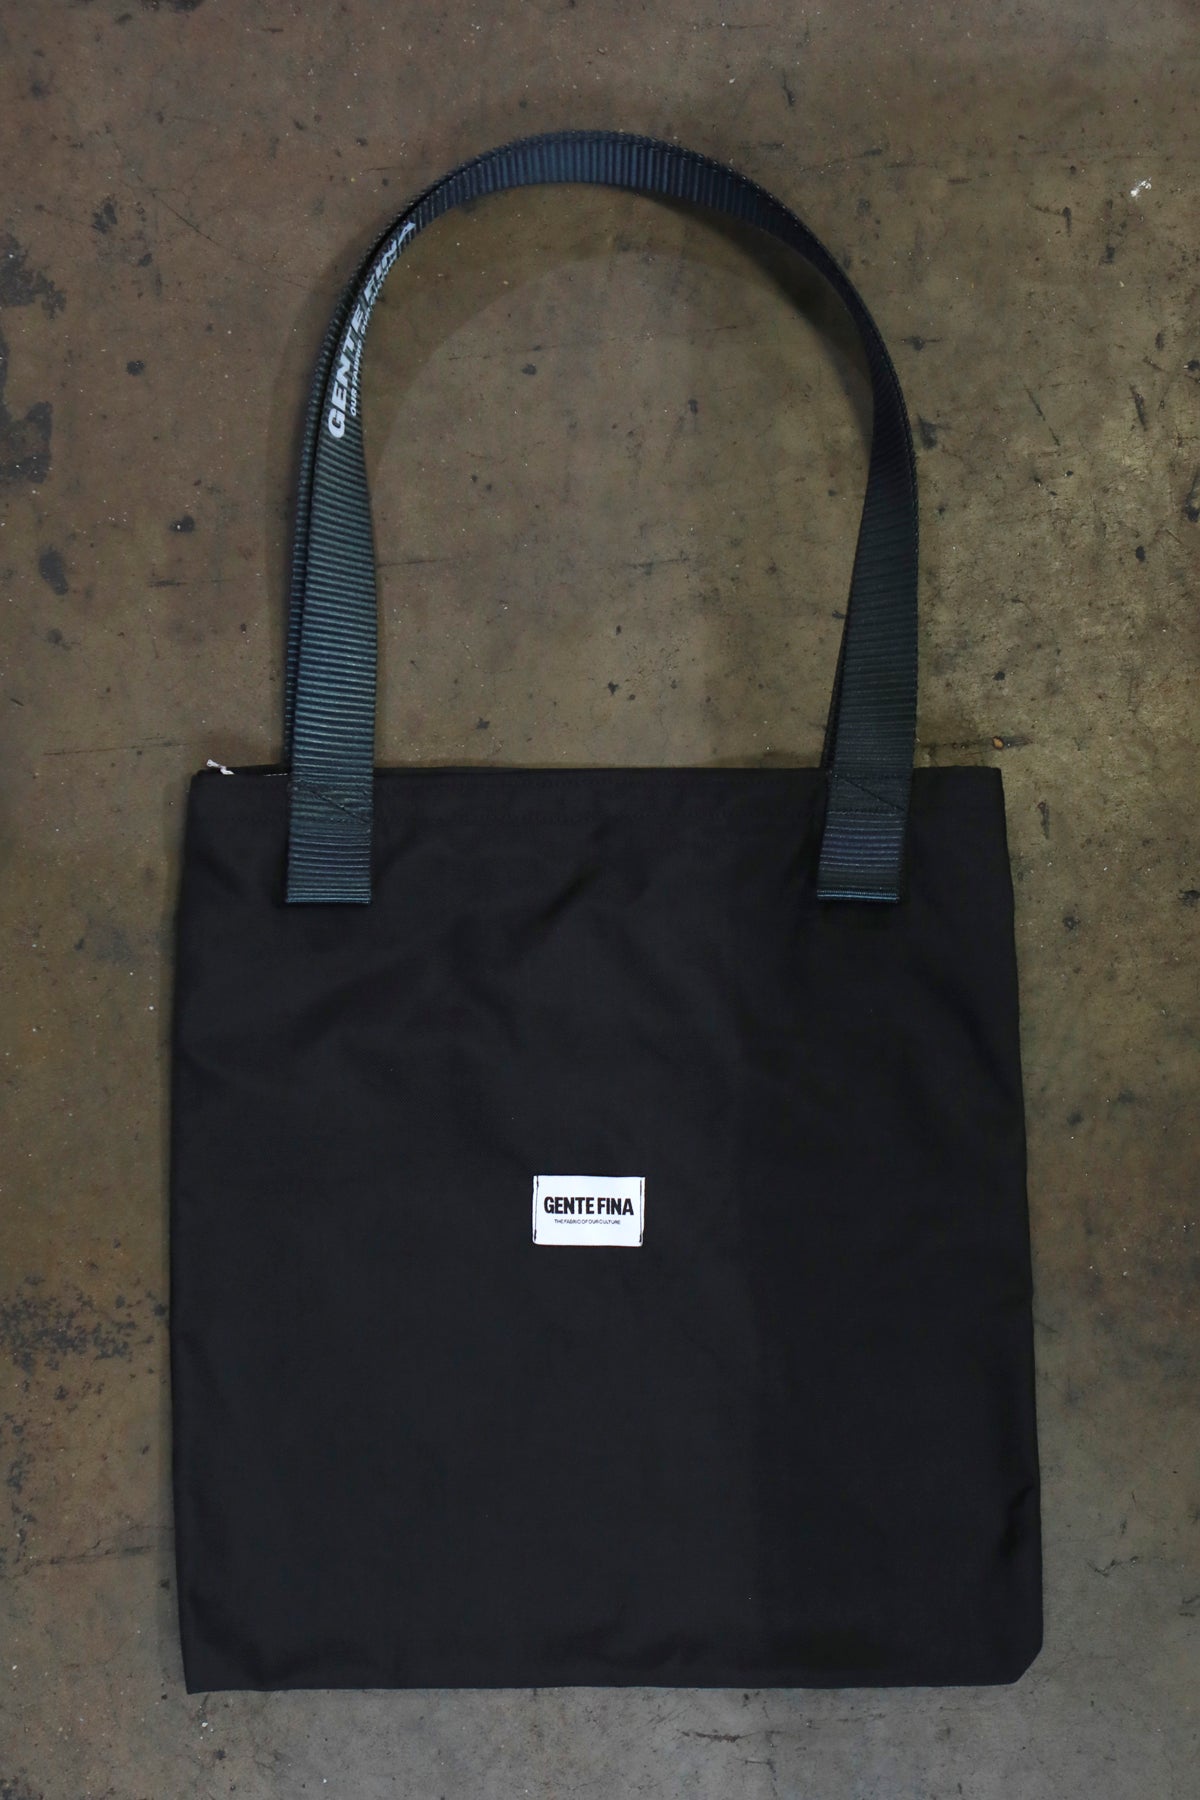 GENTE FINA RECYCLED TOTE